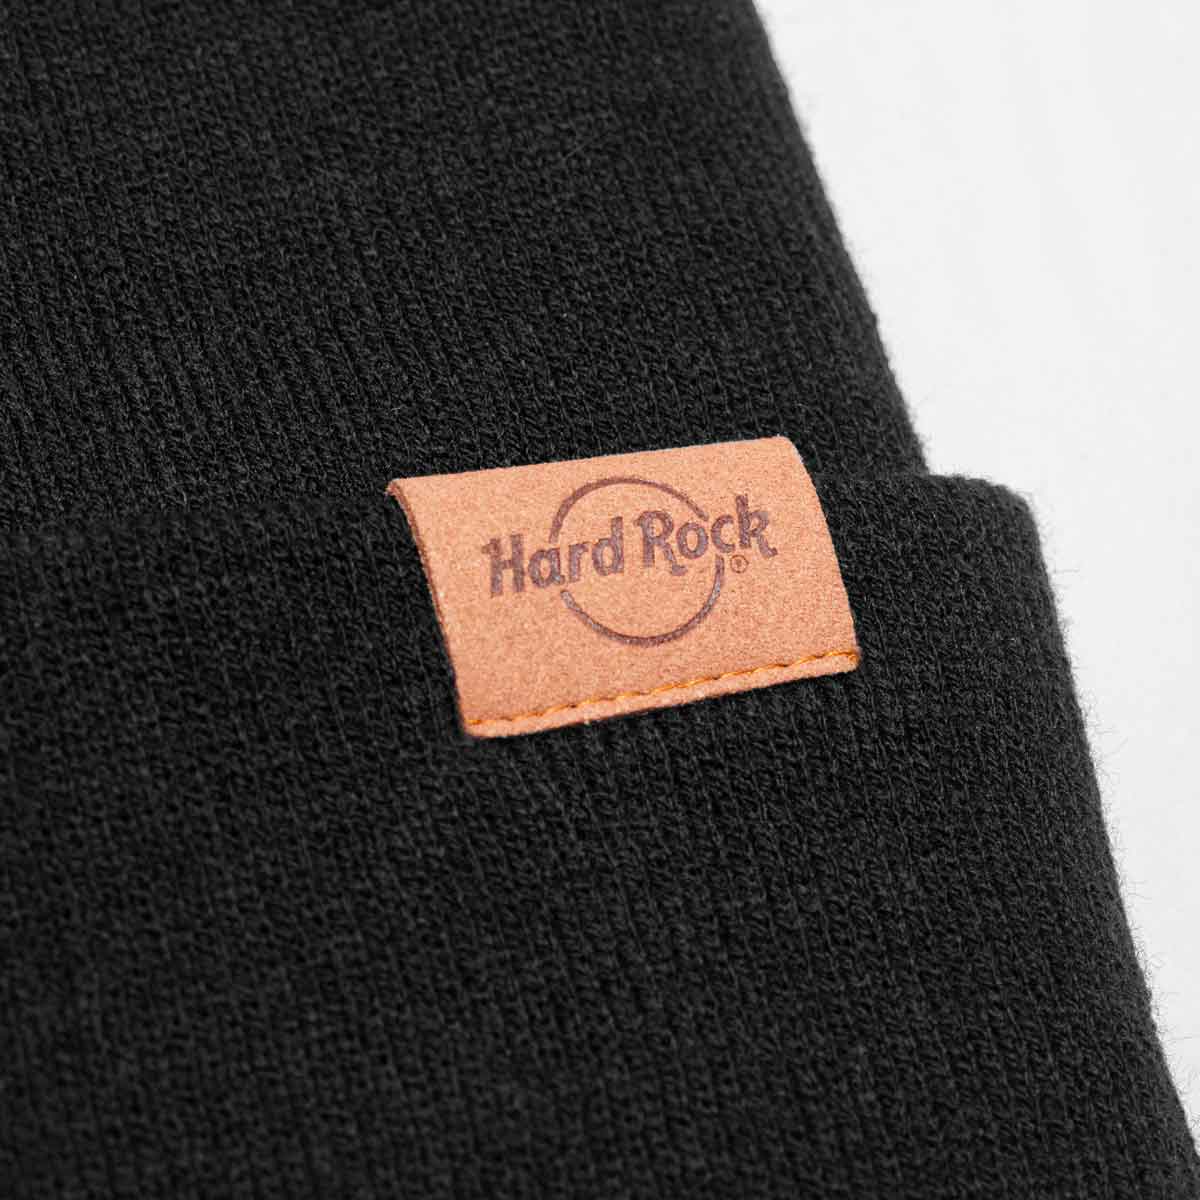 Cuffed Up Hard Rock Beanie in Black with Tan Logo image number 2